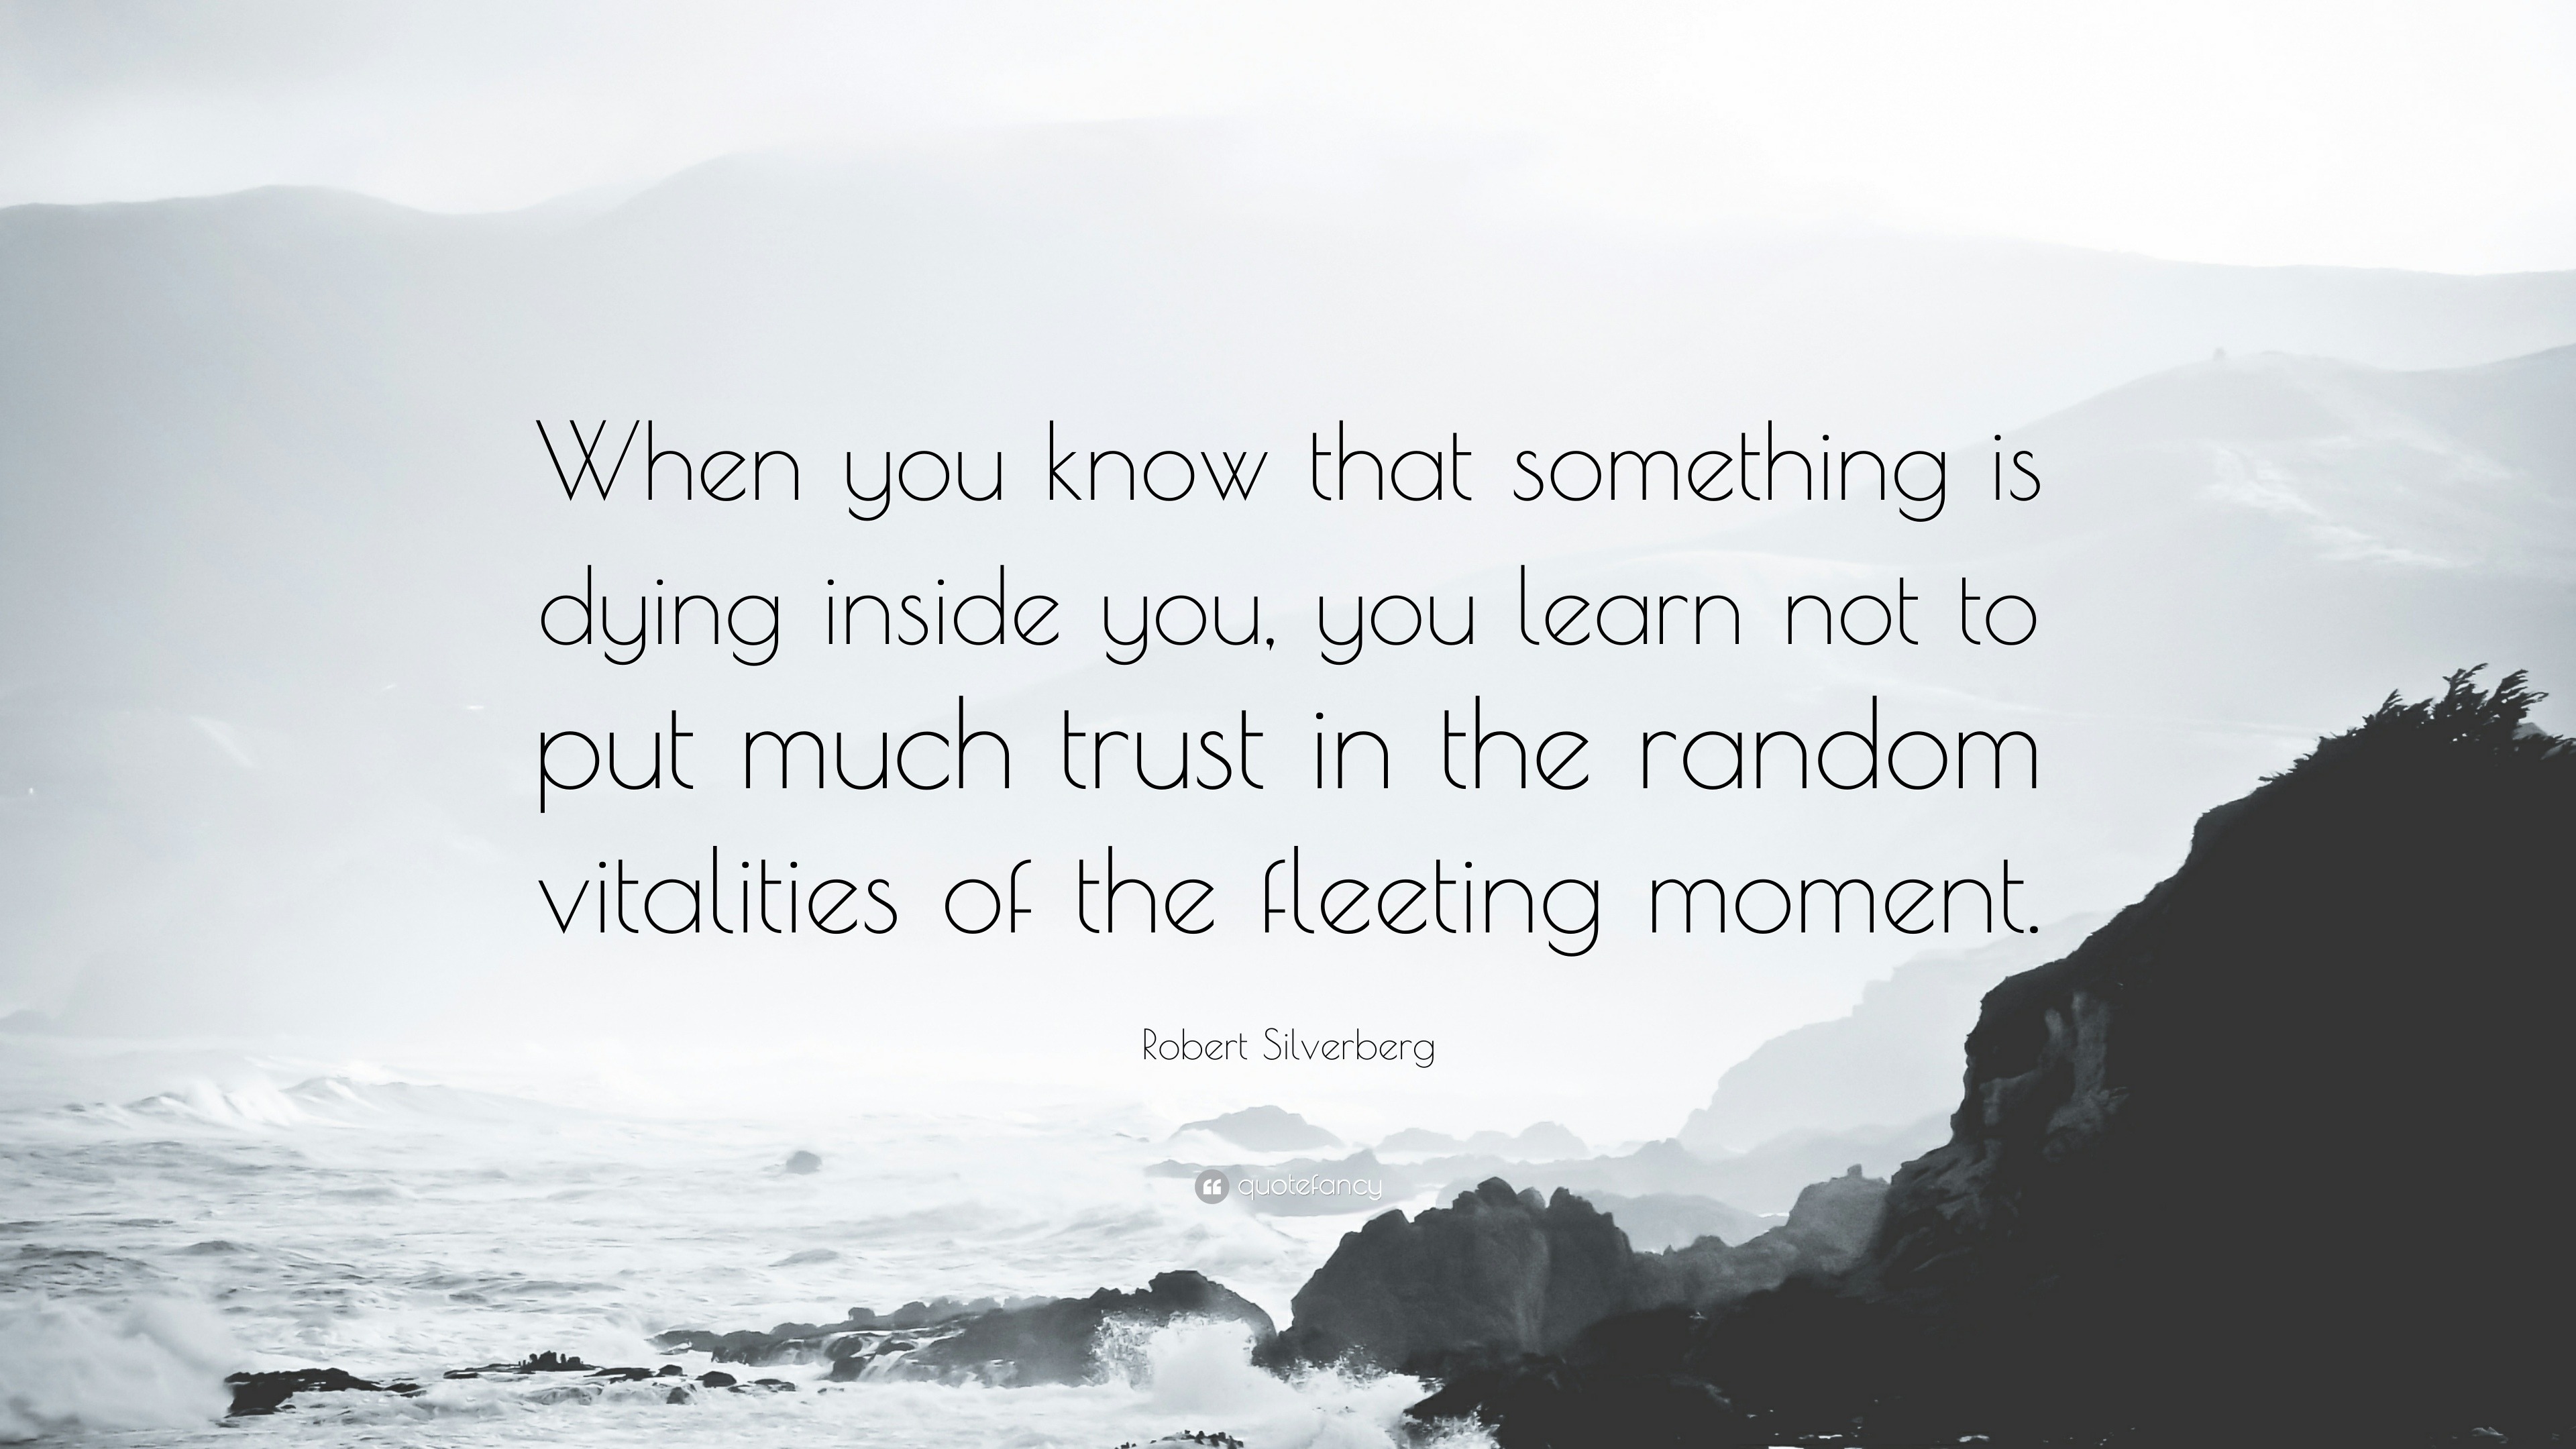 Robert Silverberg Quote: “When You Know That Something Is Dying Inside You, You Learn Not To Put Much Trust In The Random Vitalities Of The Fleeti...”